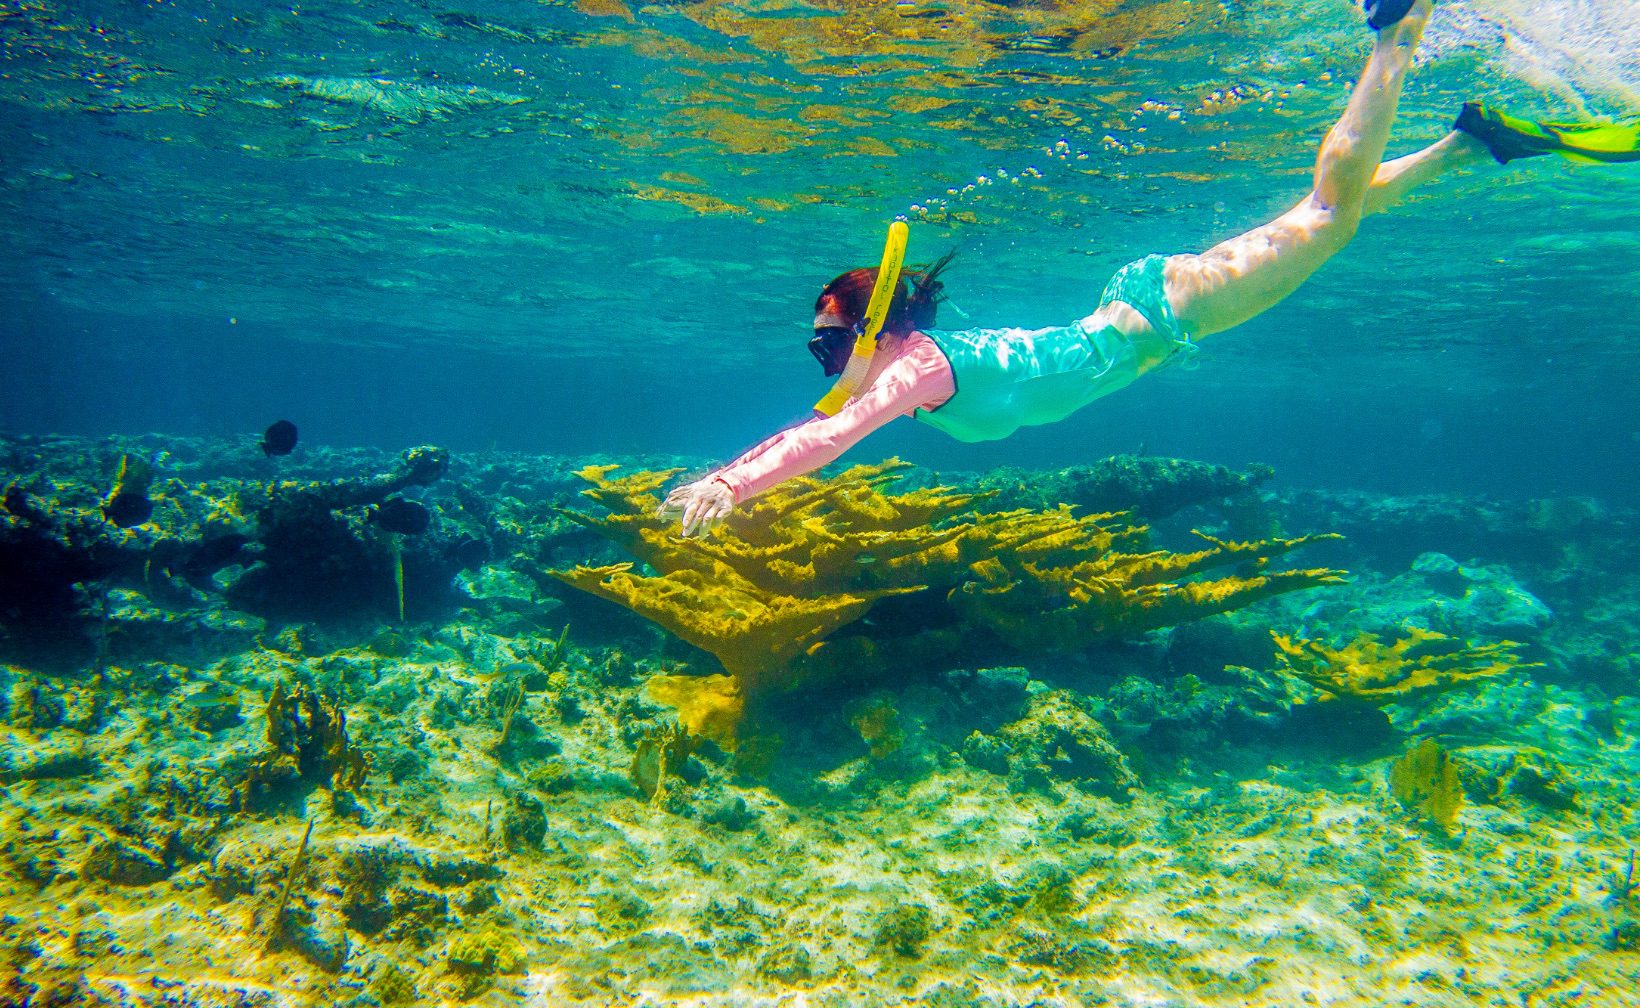 Ready to explore some of the most beautiful coral reefs in the world? Snorkeling in Turks and Caicos is second to none.